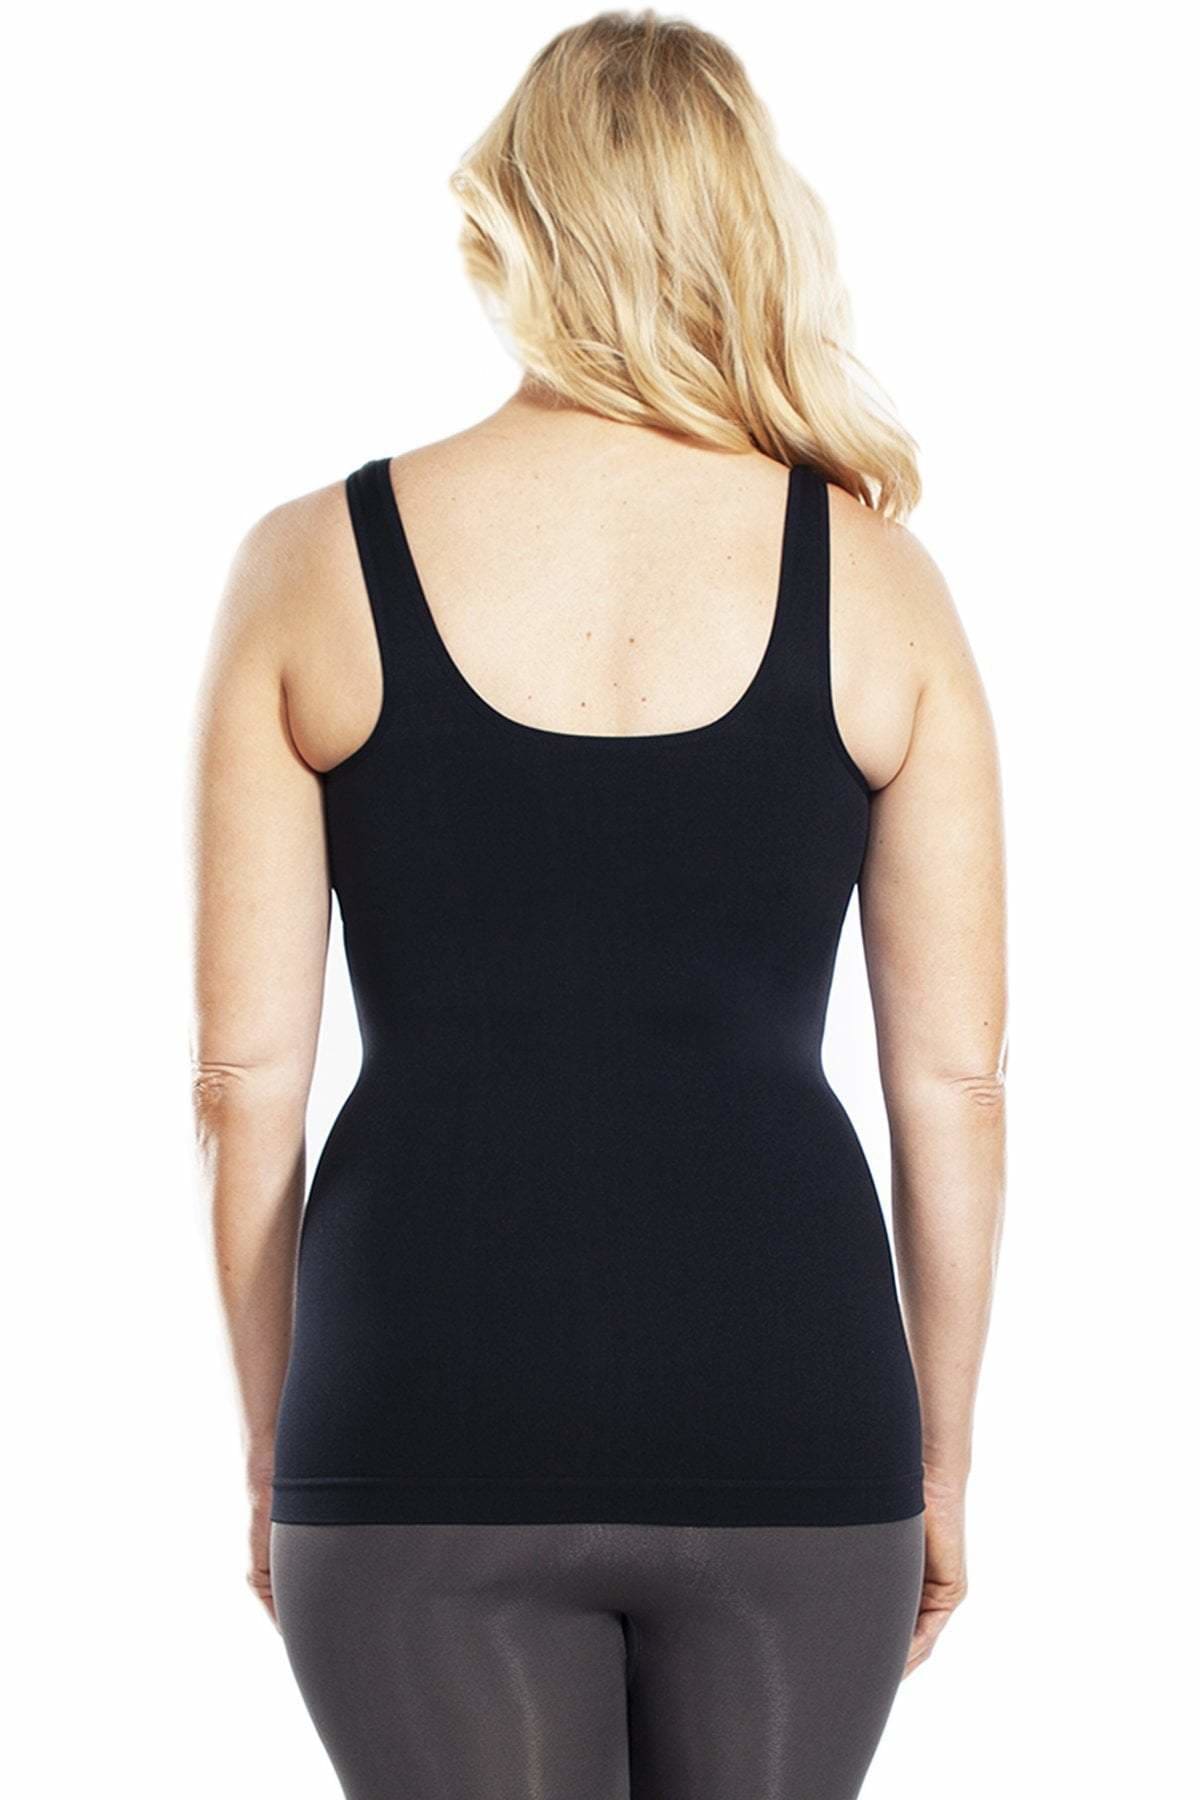 Women's Comfy Smoothing Seamless Shaping Tank Top Shapewear - M 